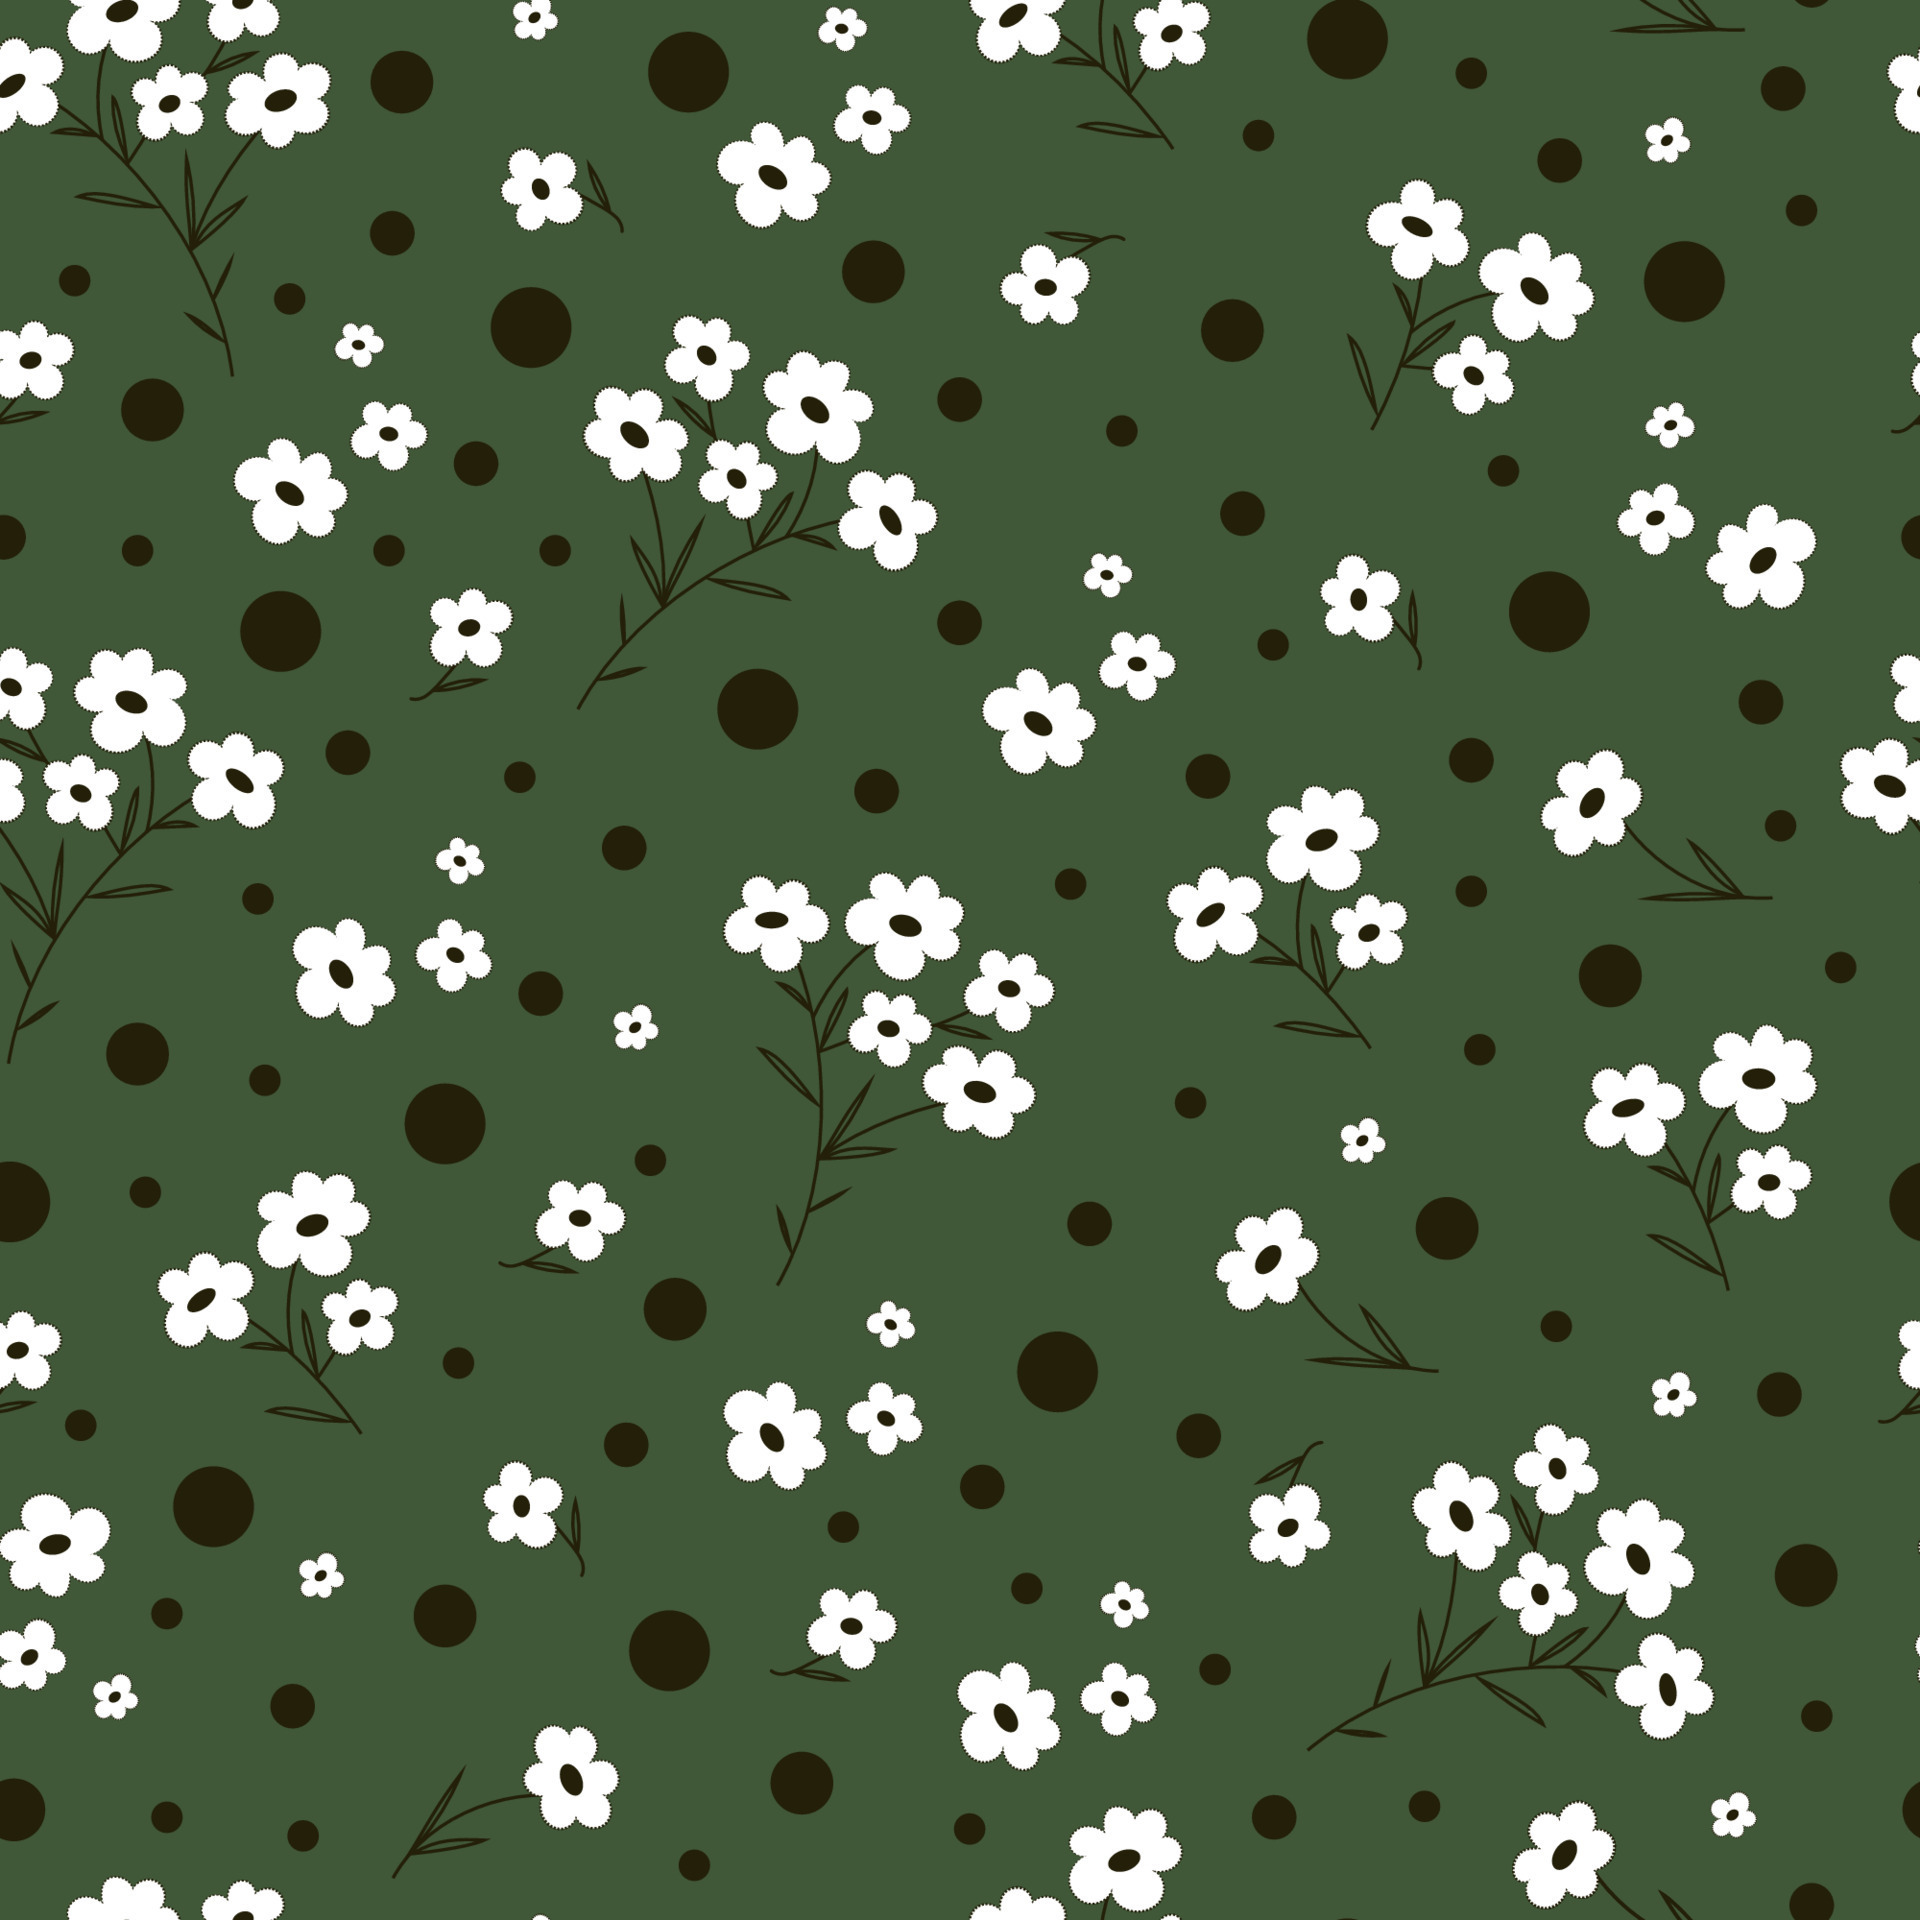 A simple cute pattern of small white flowers on a dark green ...